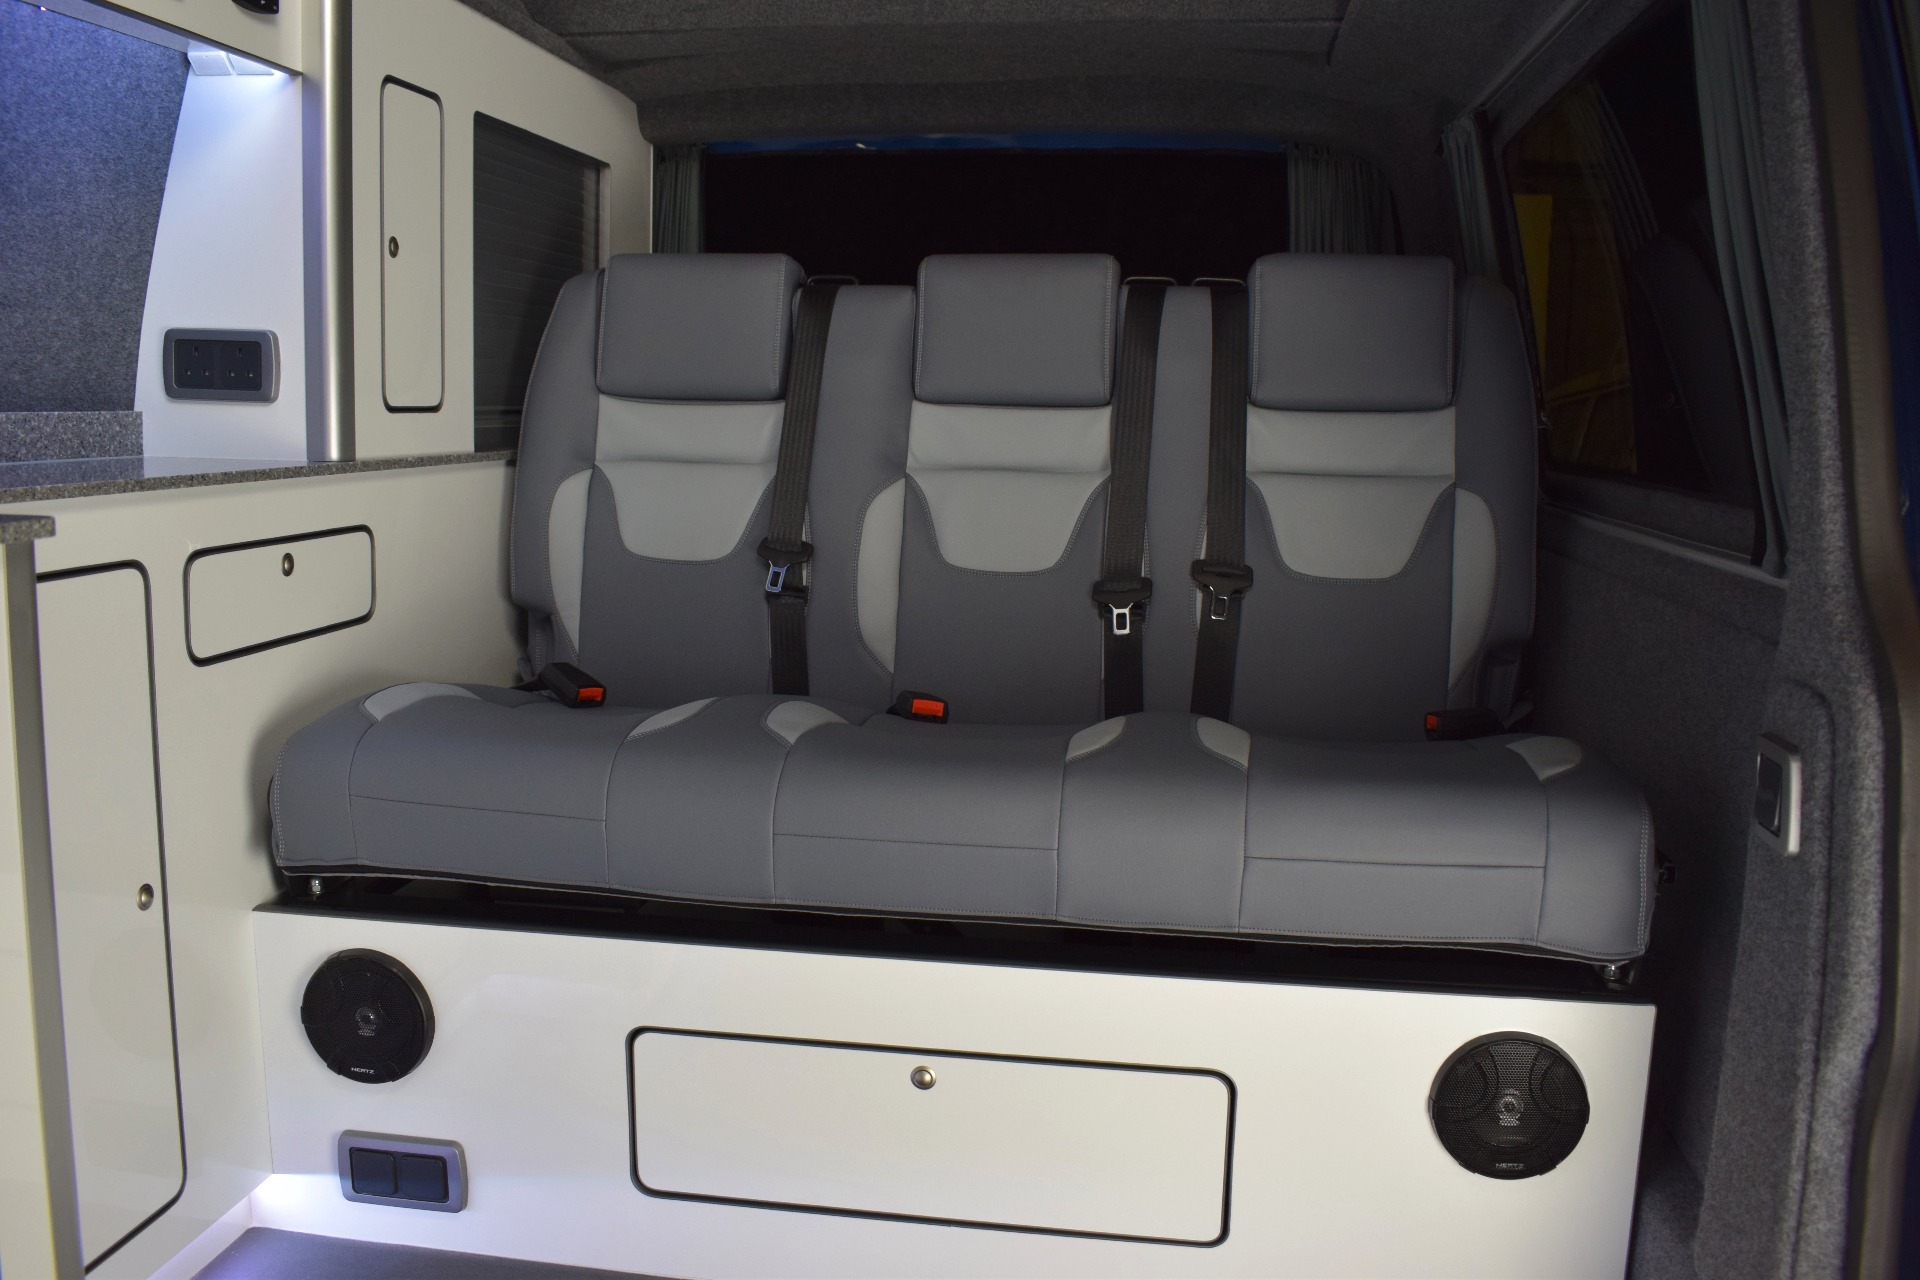 3 seater RIB rock n roll bed upholstered with a nod to the Sportline SE